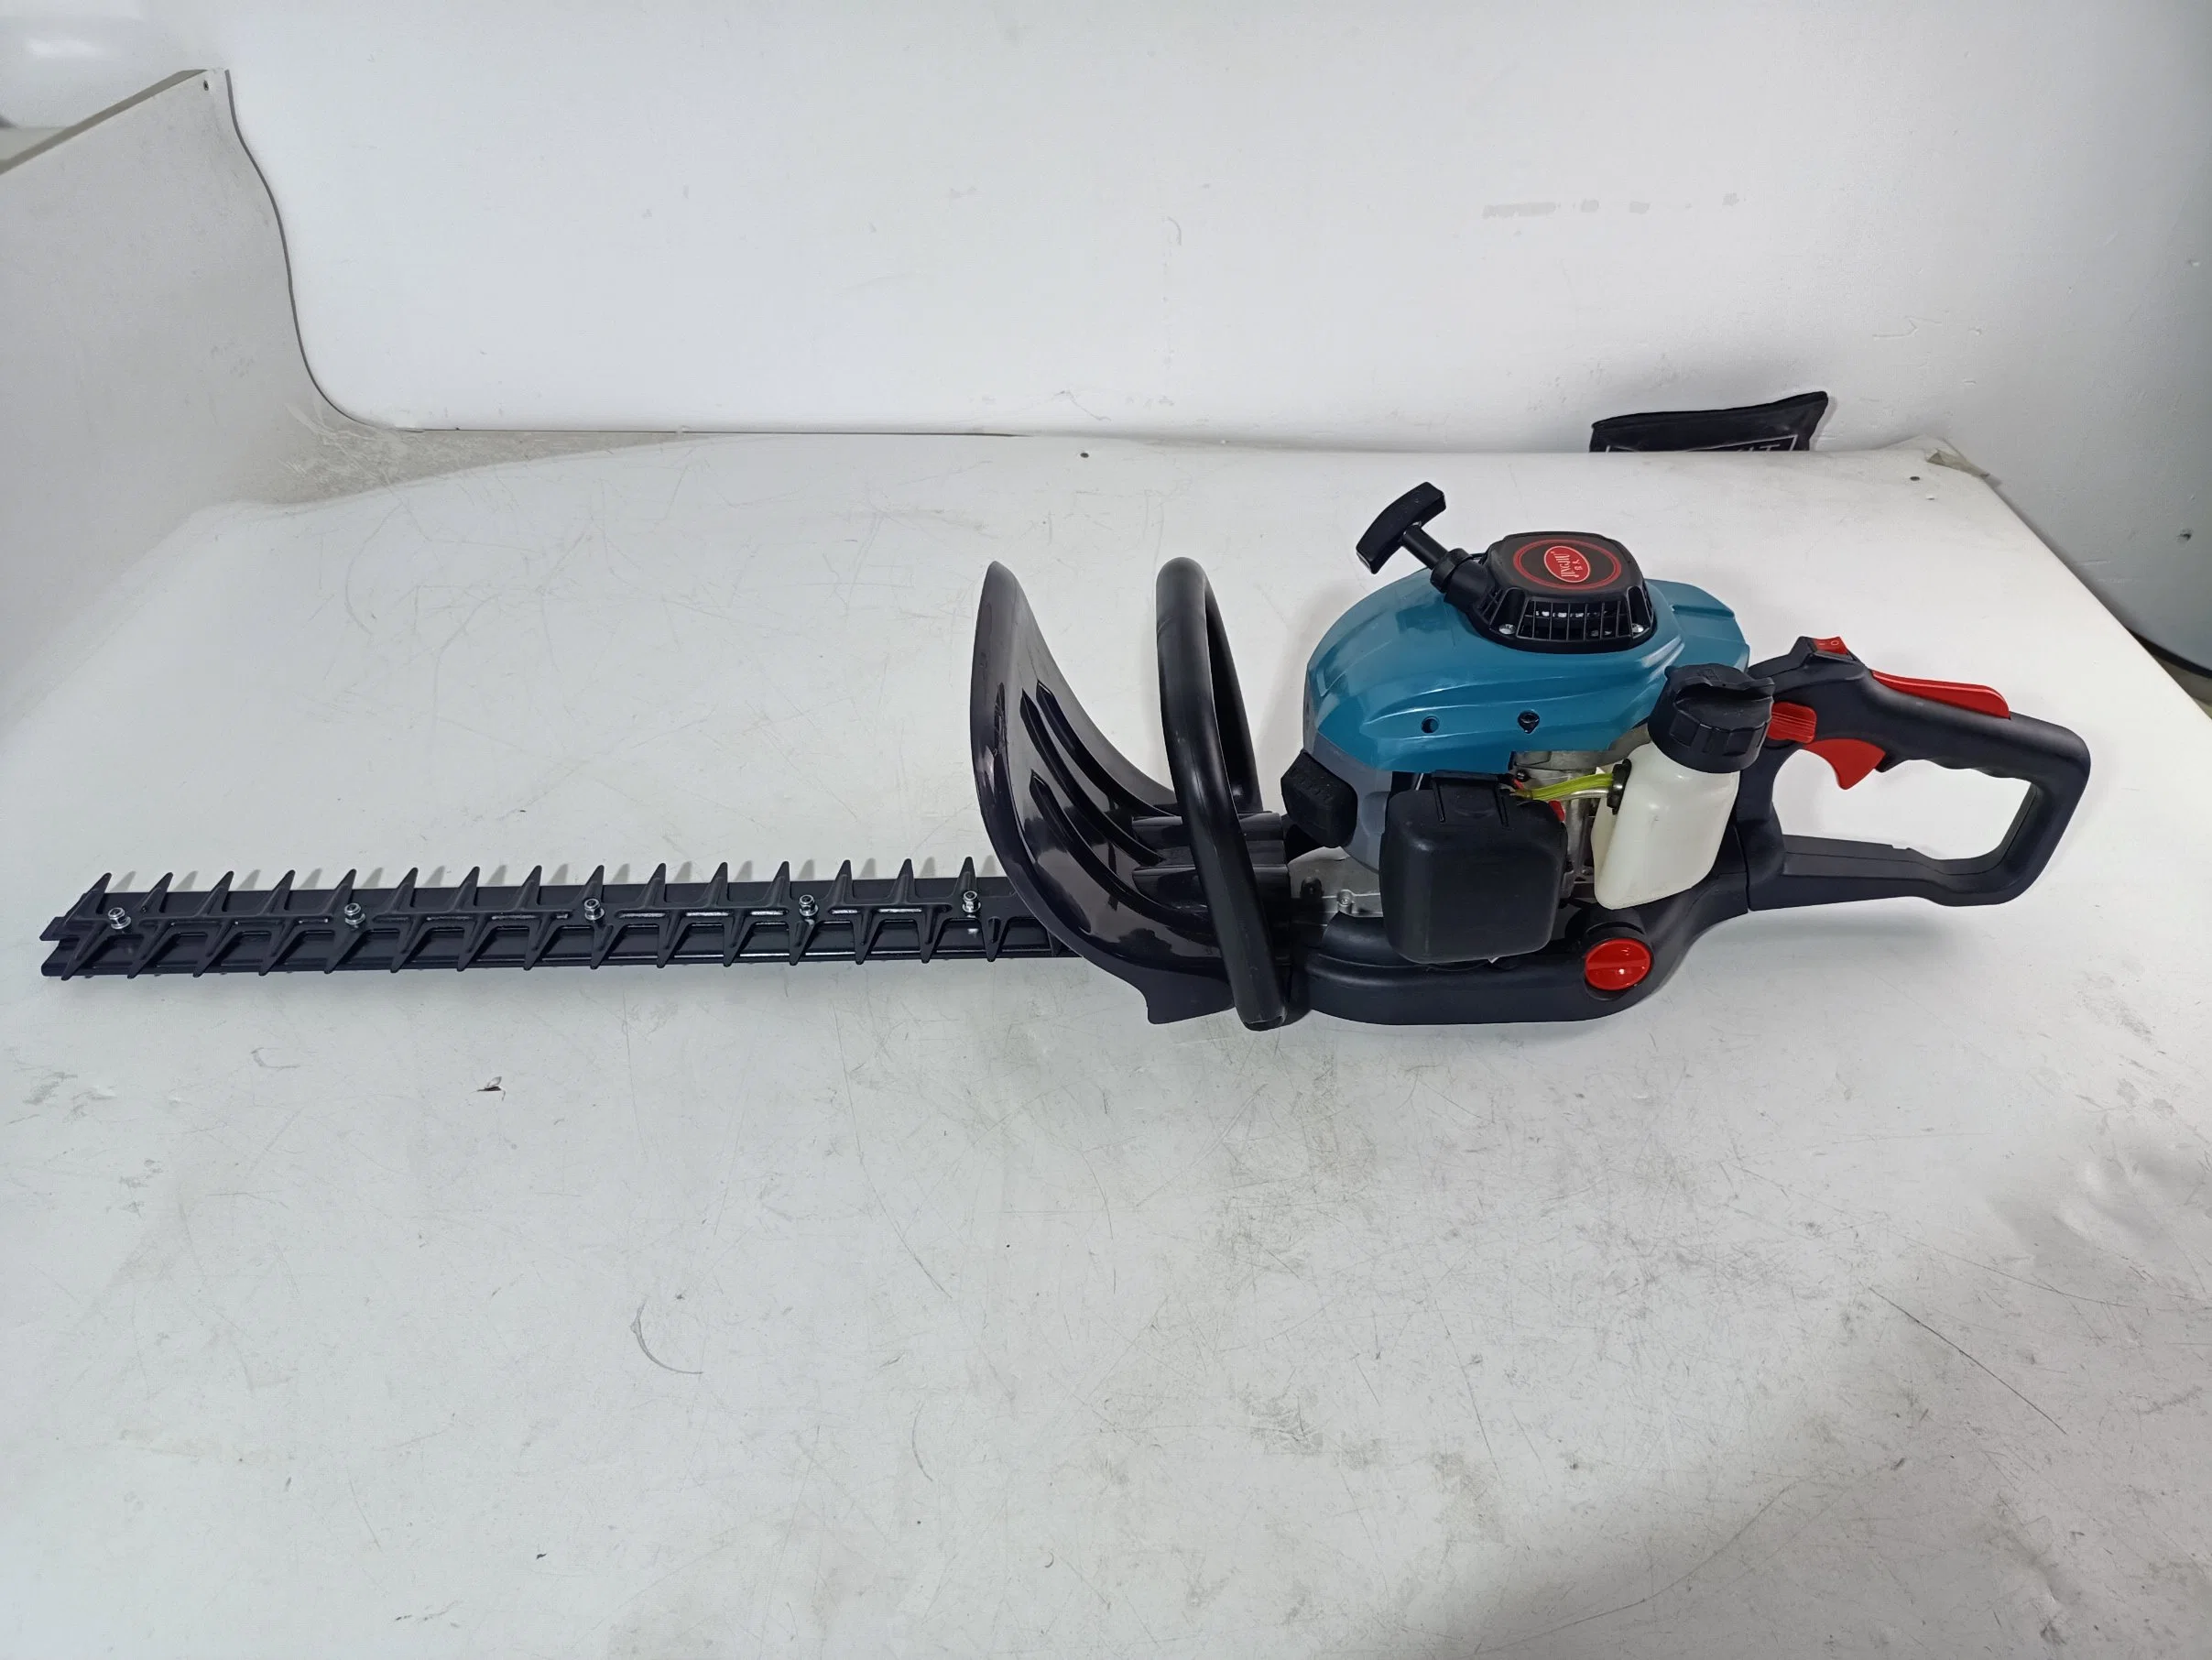 Um 1e32f Engine Double Side 22.5cc Gasoline Hedge Trimmer Made in China/Two Blades Hedge Trimmer